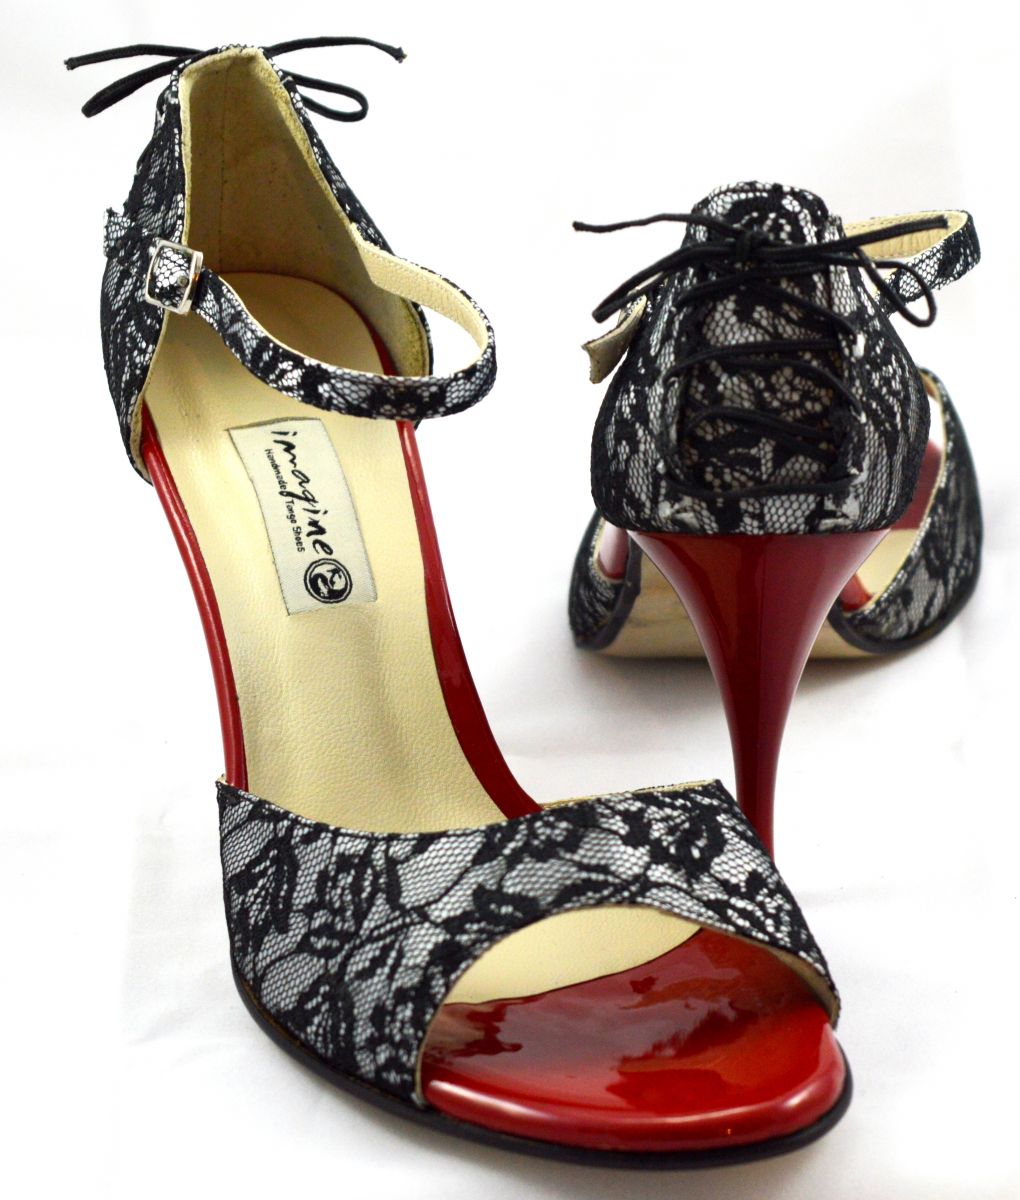 Women's Tango Shoe, open toe style, with black lace and red patent leather